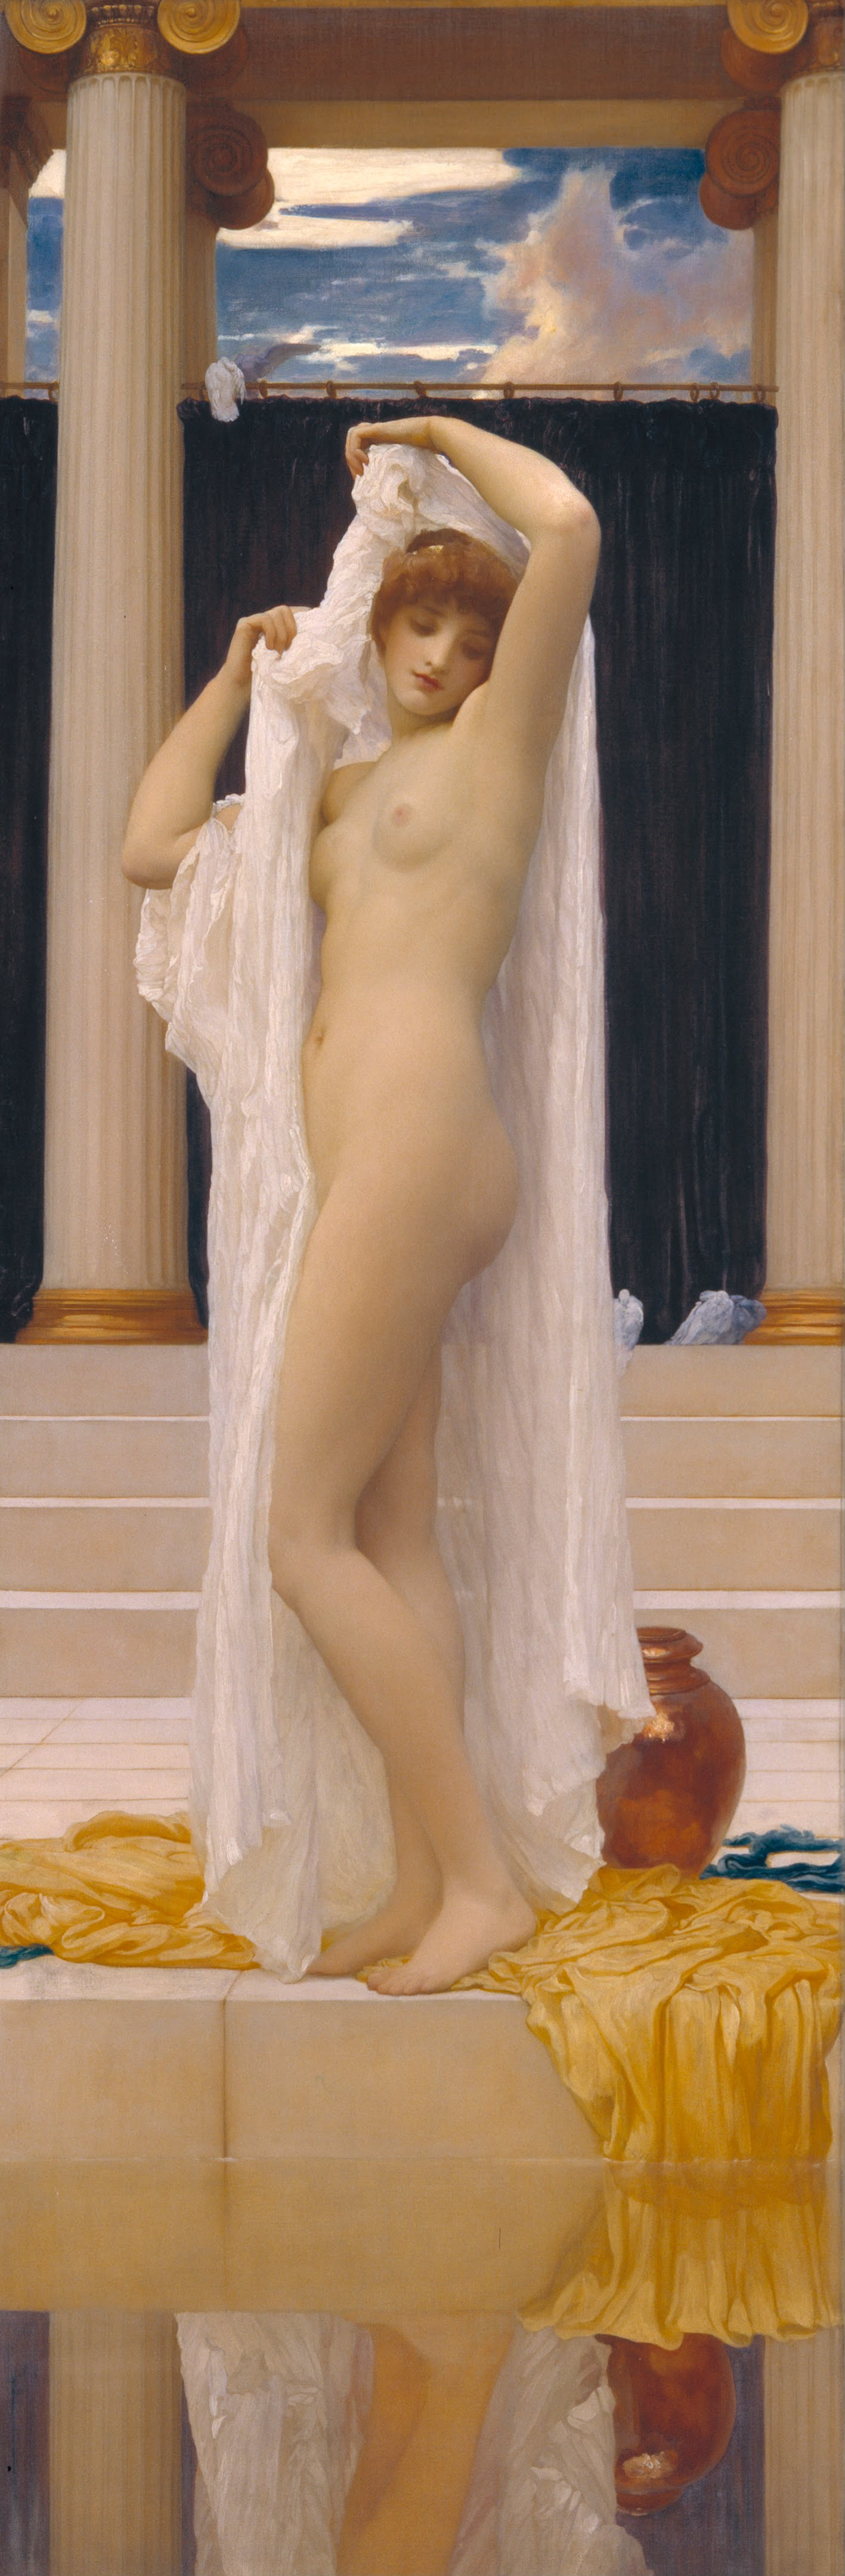 The Bath of Psyche by Frederic Leighton